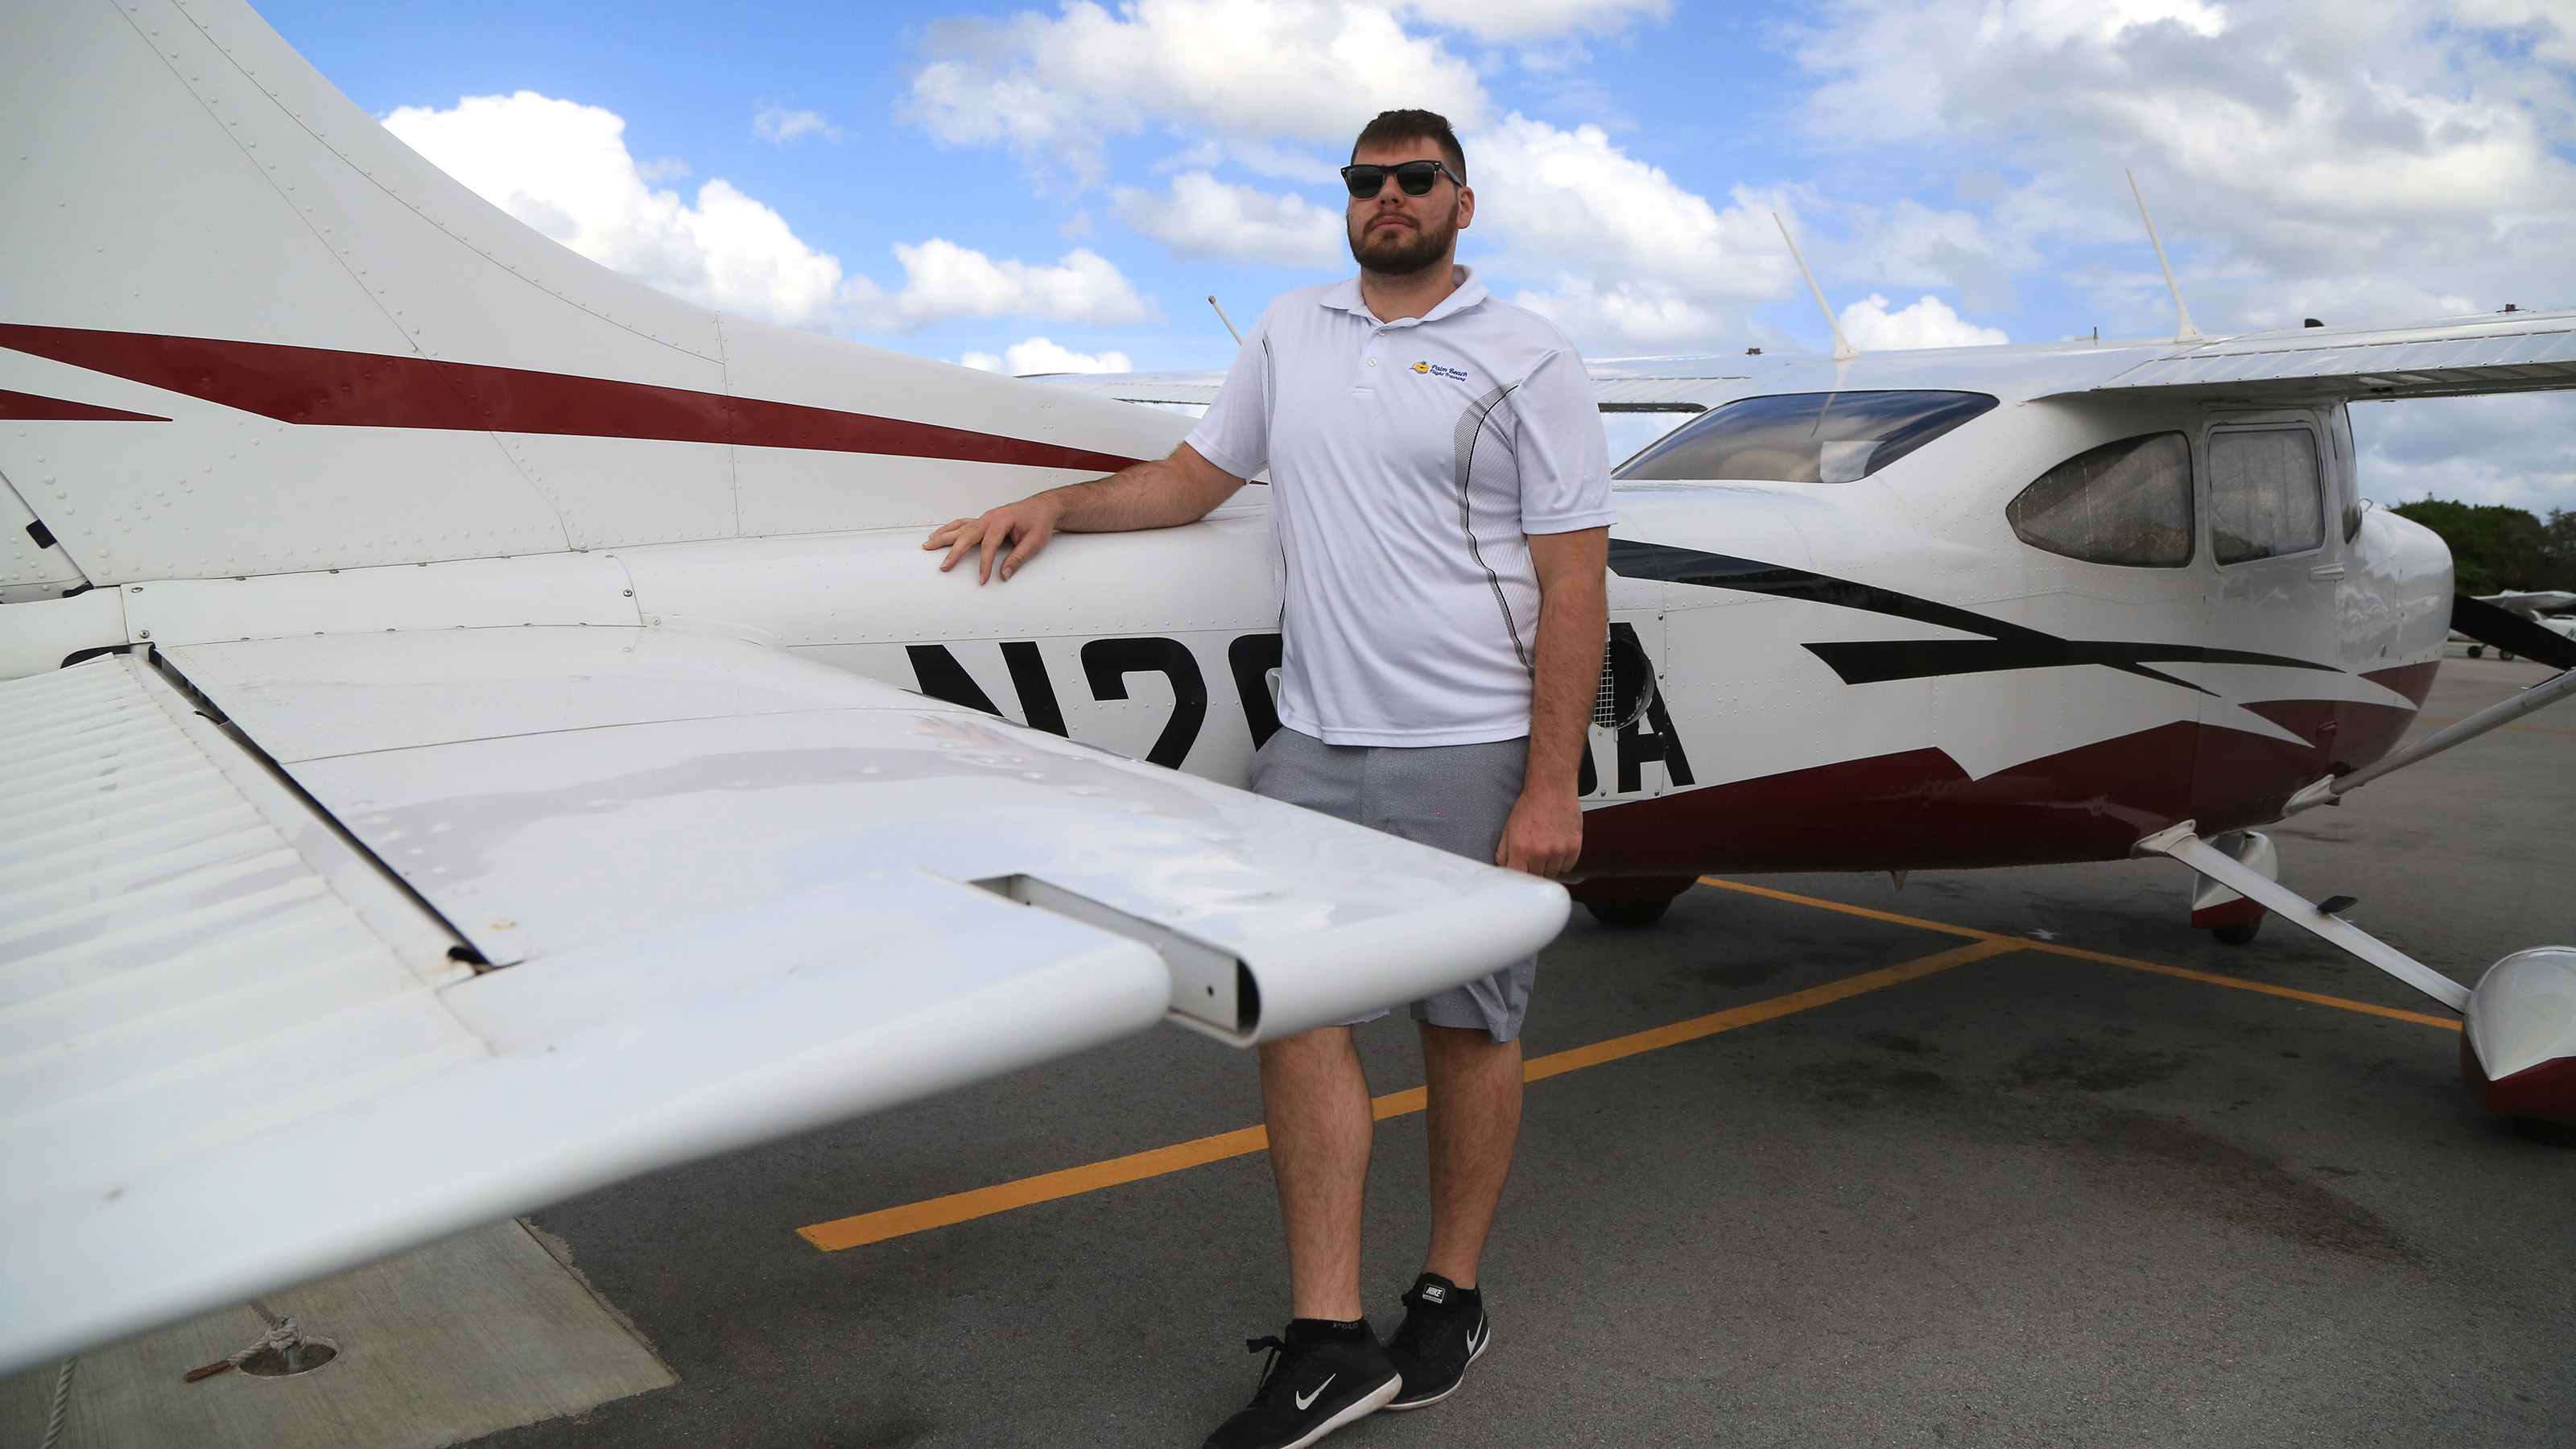 Richard Dragonette, a flight instructor at Palm Beach Flight Training school at Lantana Airport, says the school has  been impacted by the restrictions due to President Trump's Mar-a-Lago visits. Courtesy of Carline Jean, Fort Lauderdale Sun-Sentinel.